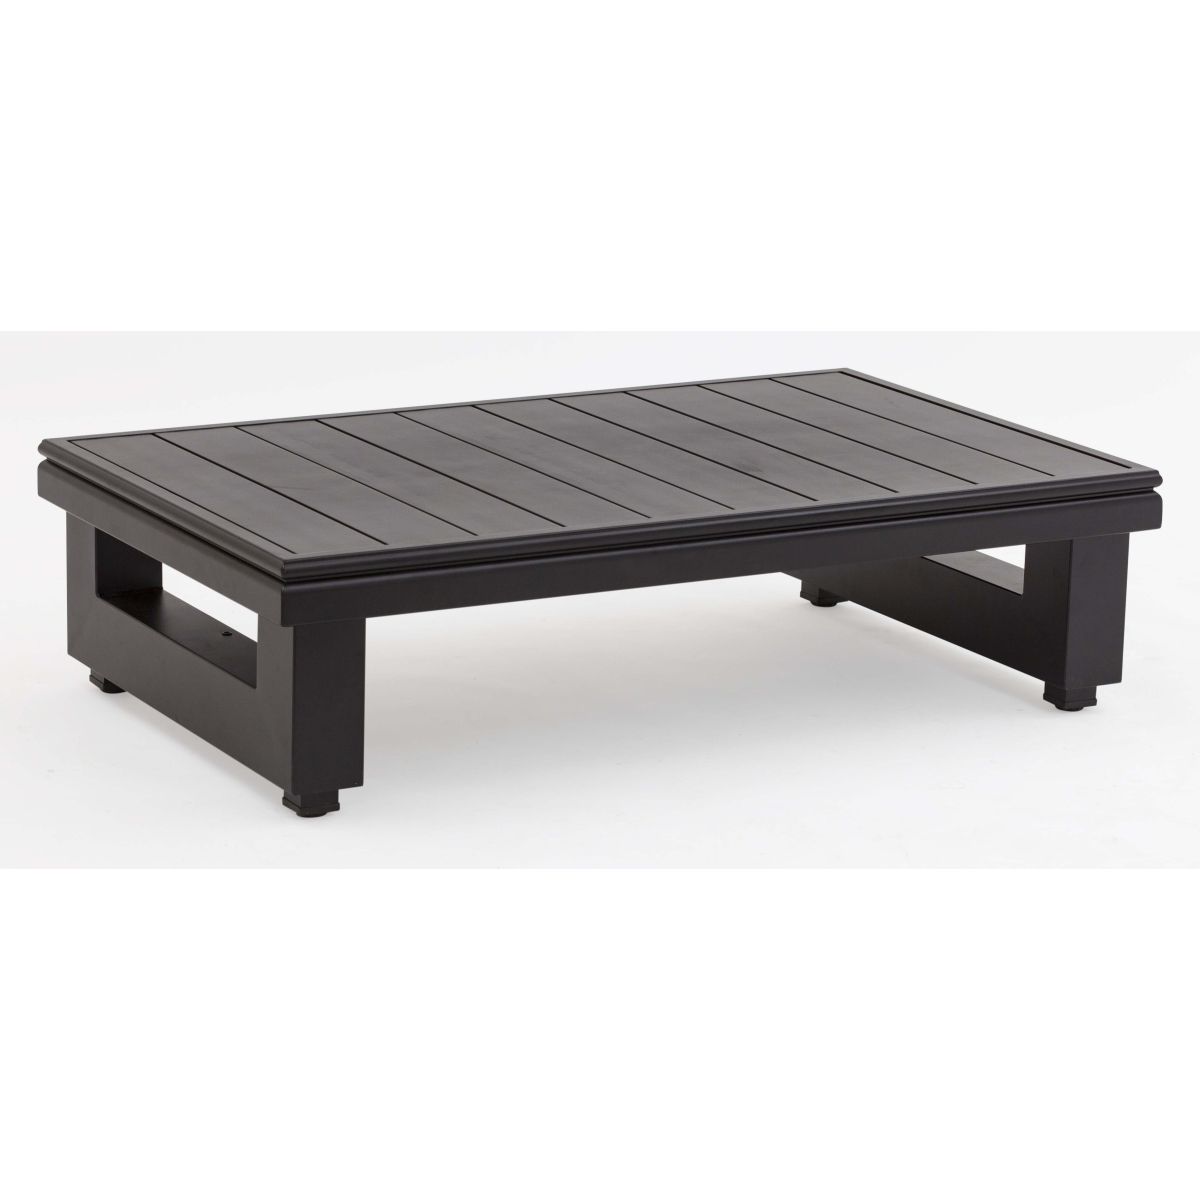 Safavieh Couture Montford Coffee Table